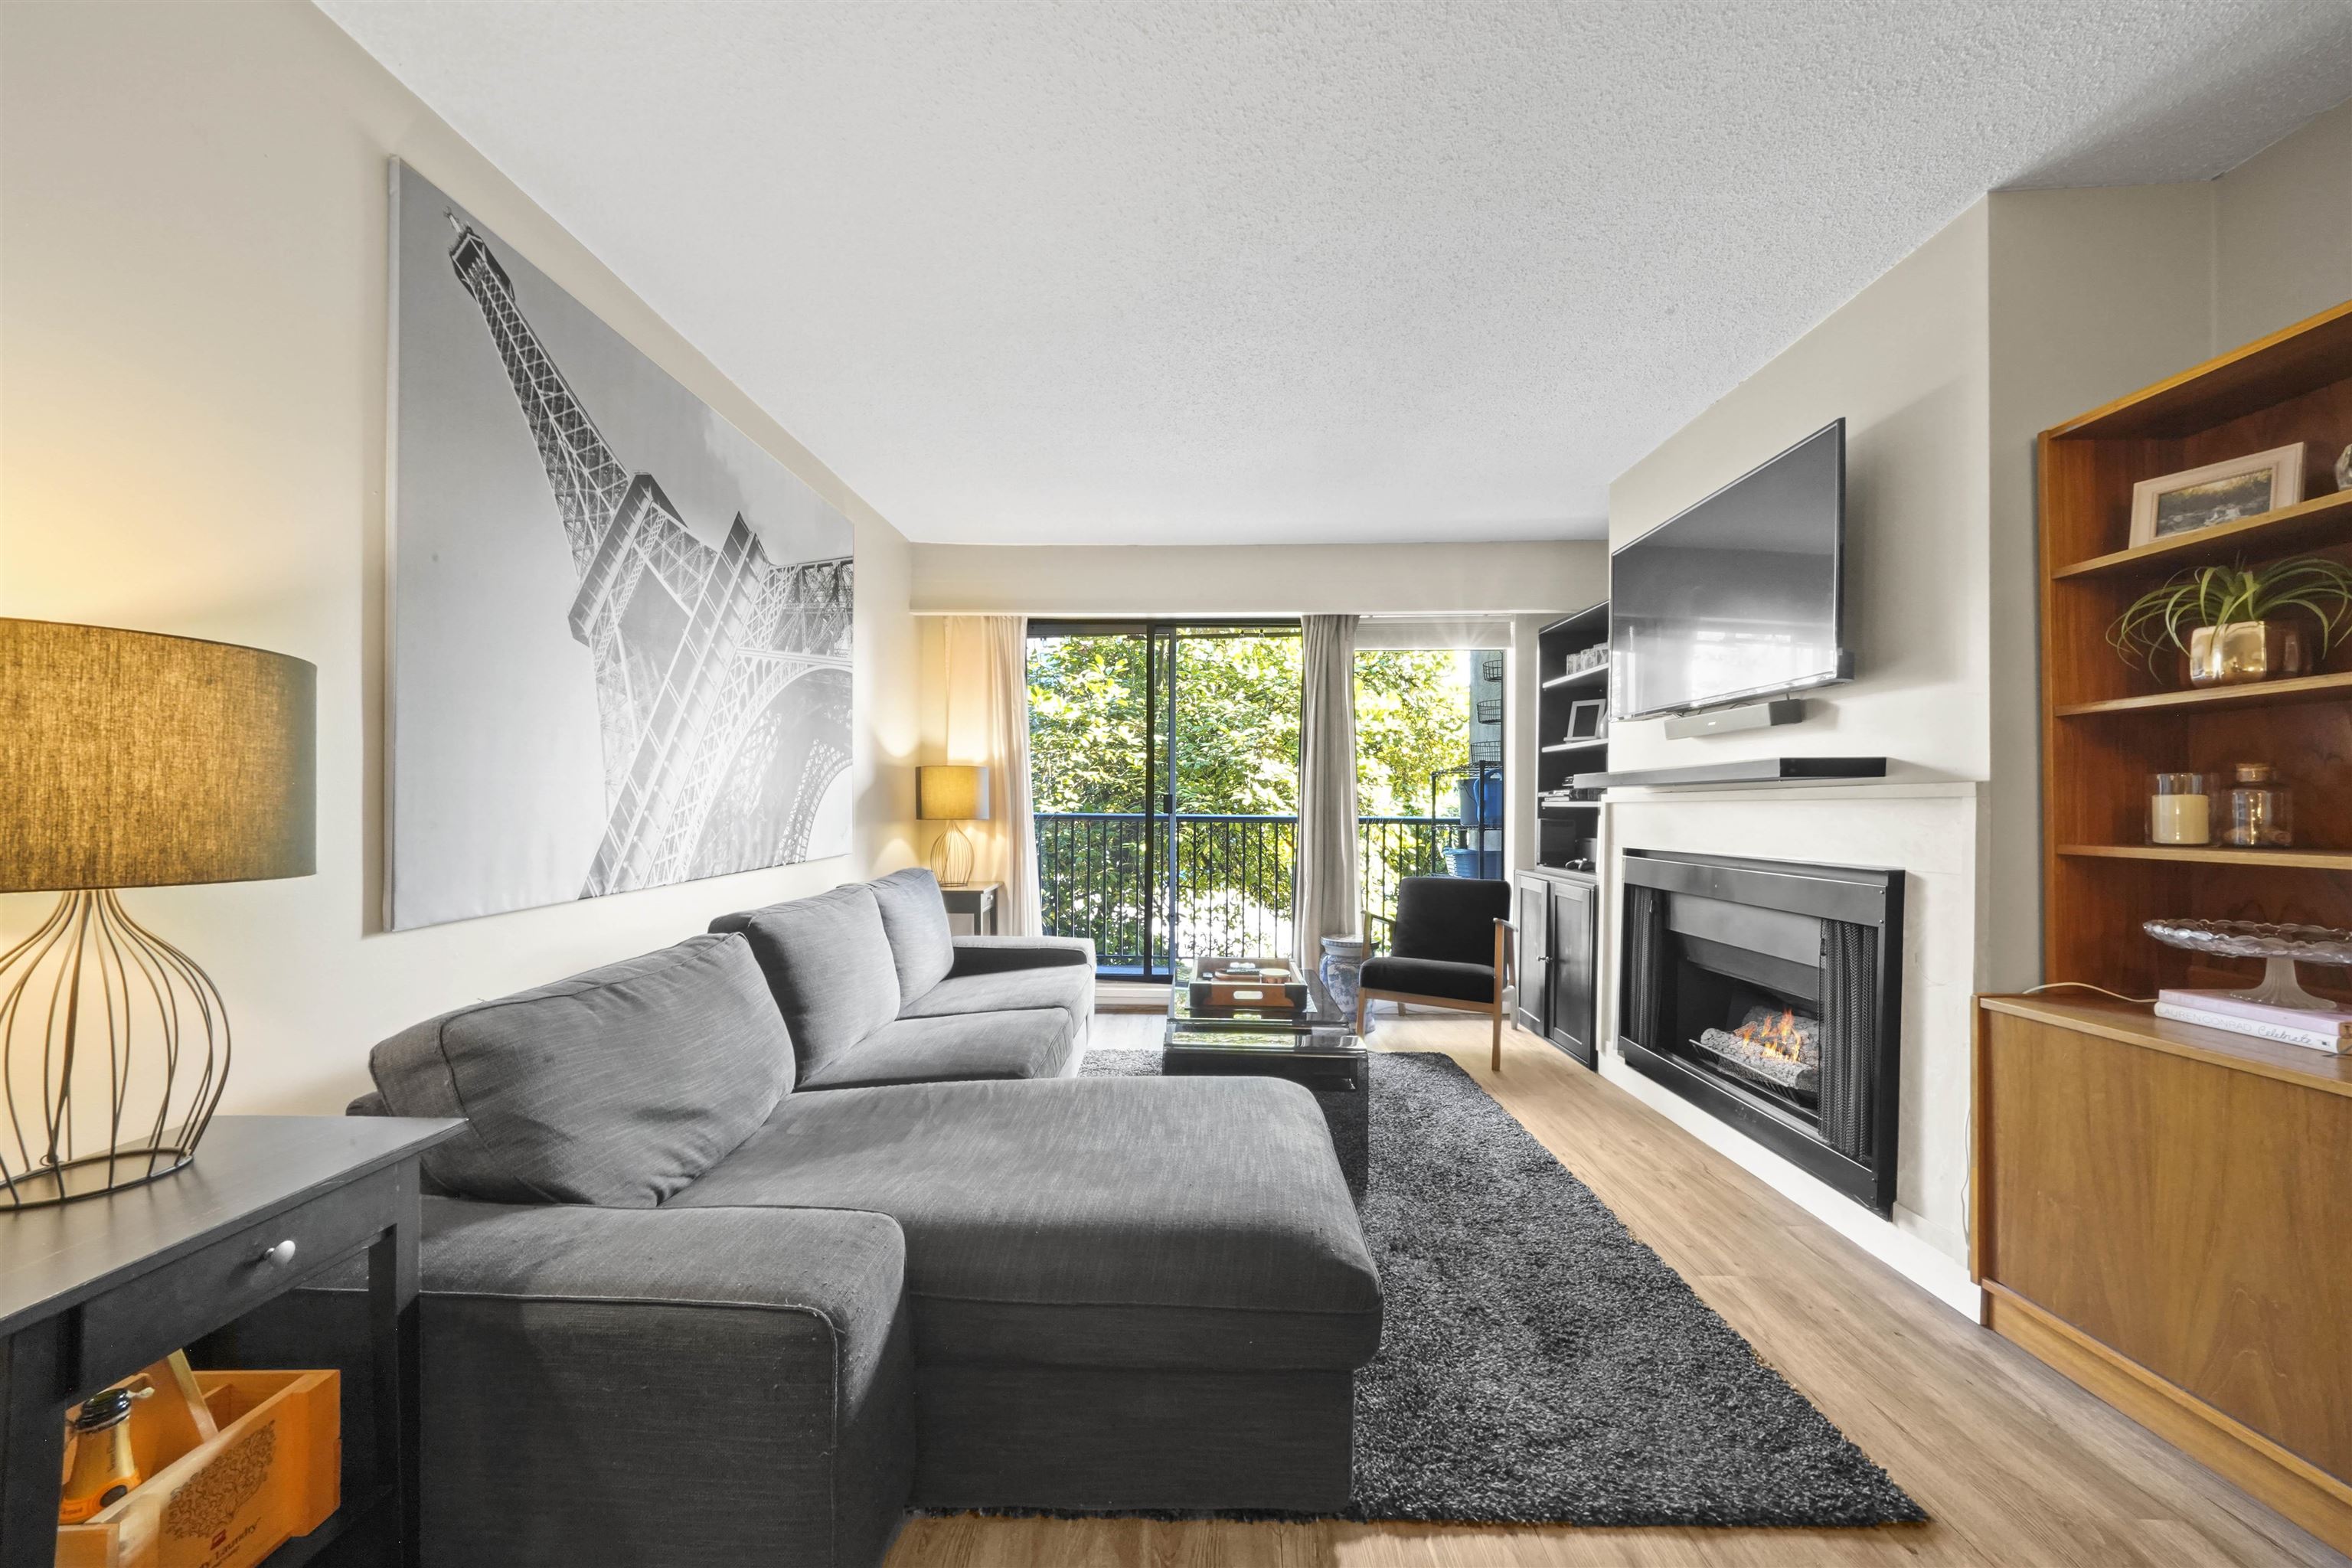 Listing image of 208 2545 LONSDALE AVENUE